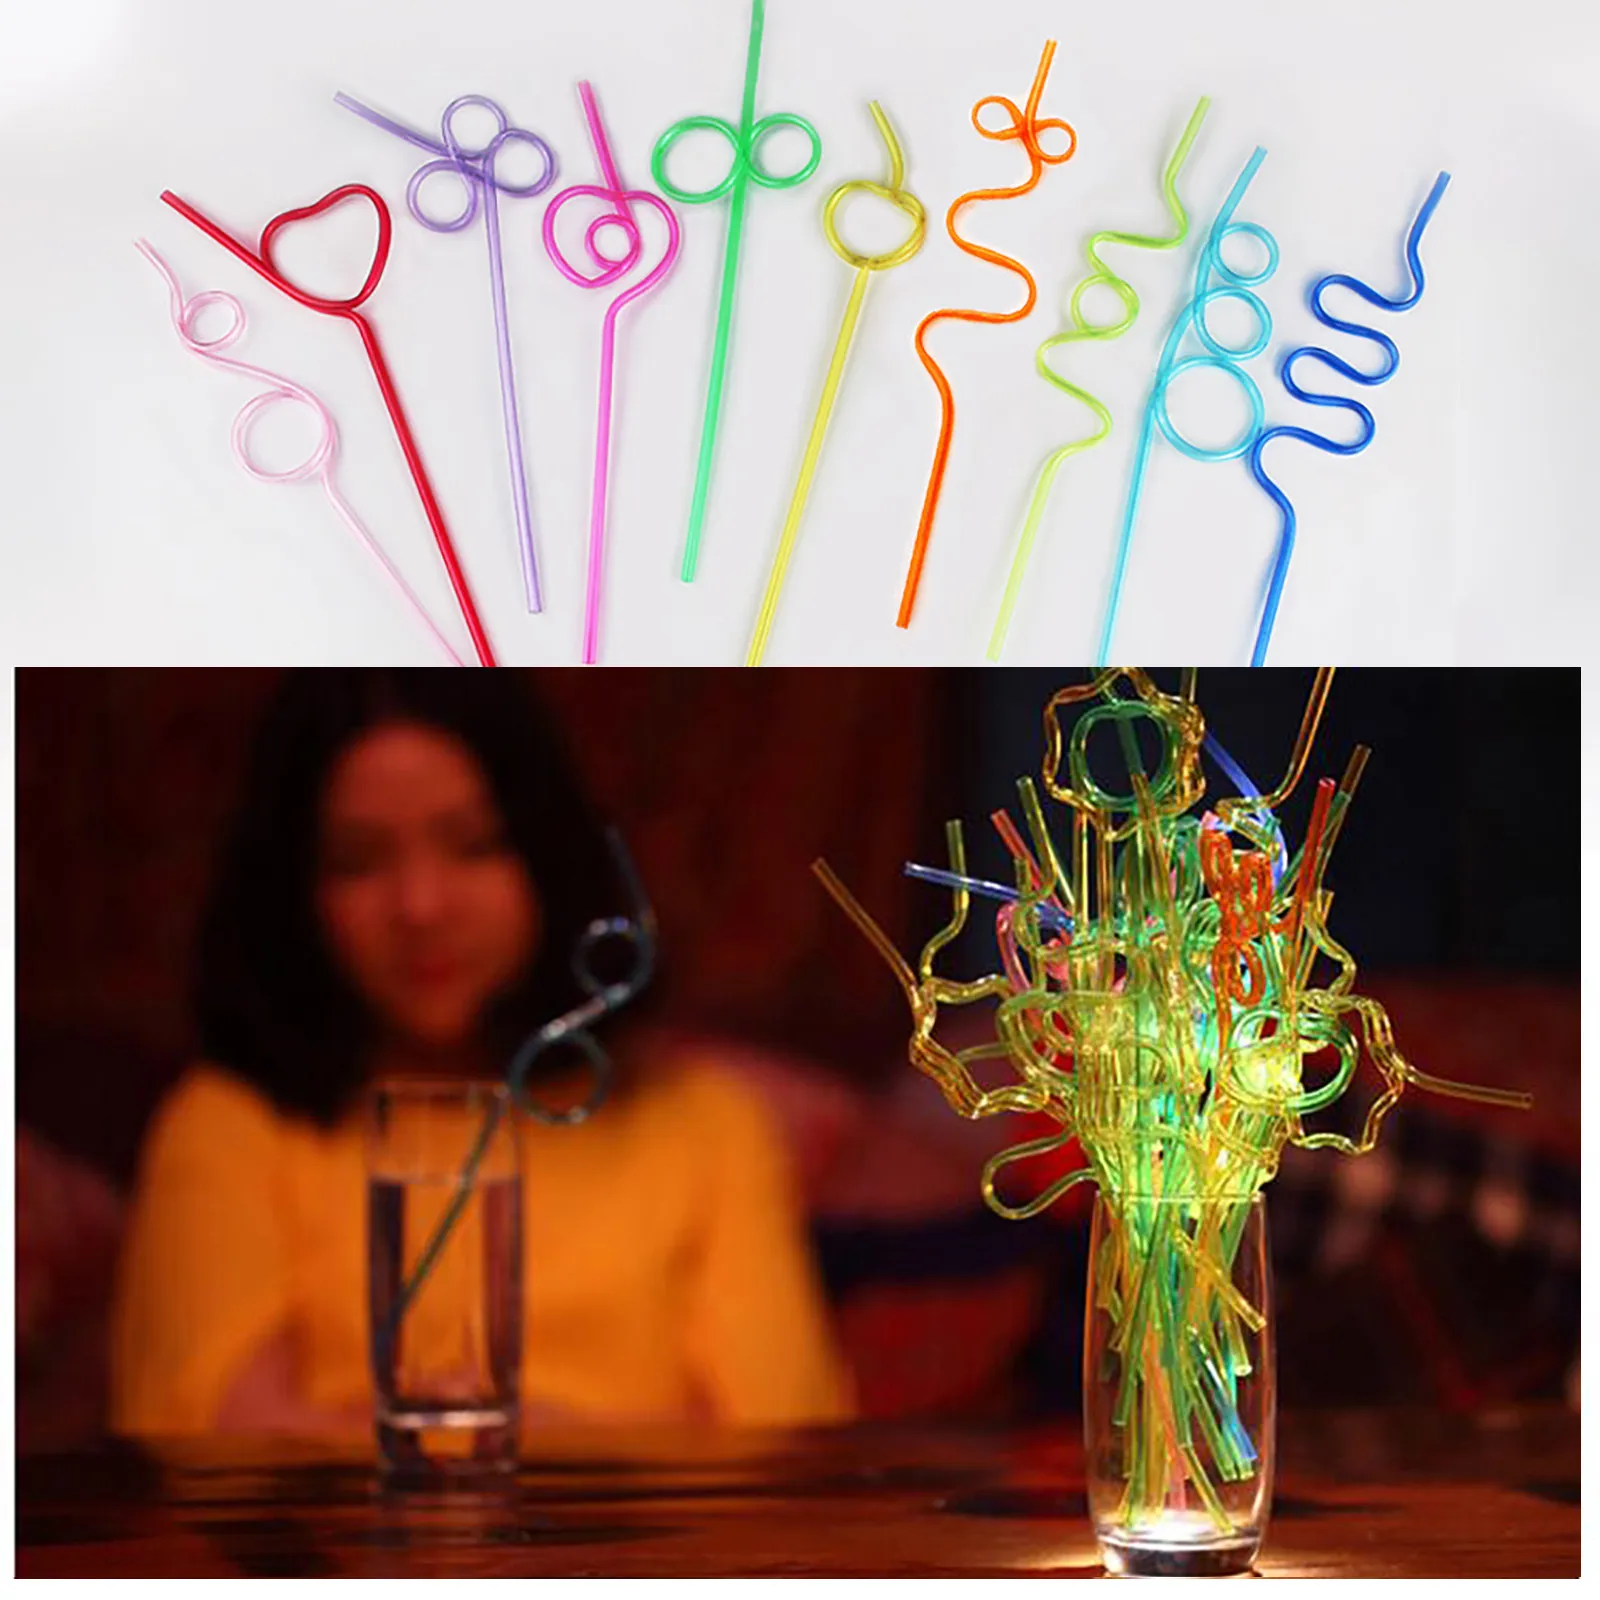 https://ae01.alicdn.com/kf/S802e46fcd6e34194a1d9cf2380e819c9N/10pcs-set-Creative-Colorful-Crazy-Curly-Loop-Plastic-Drinking-Straws-For-Birthday-Party-Bar-Decorative-Crazy.jpg